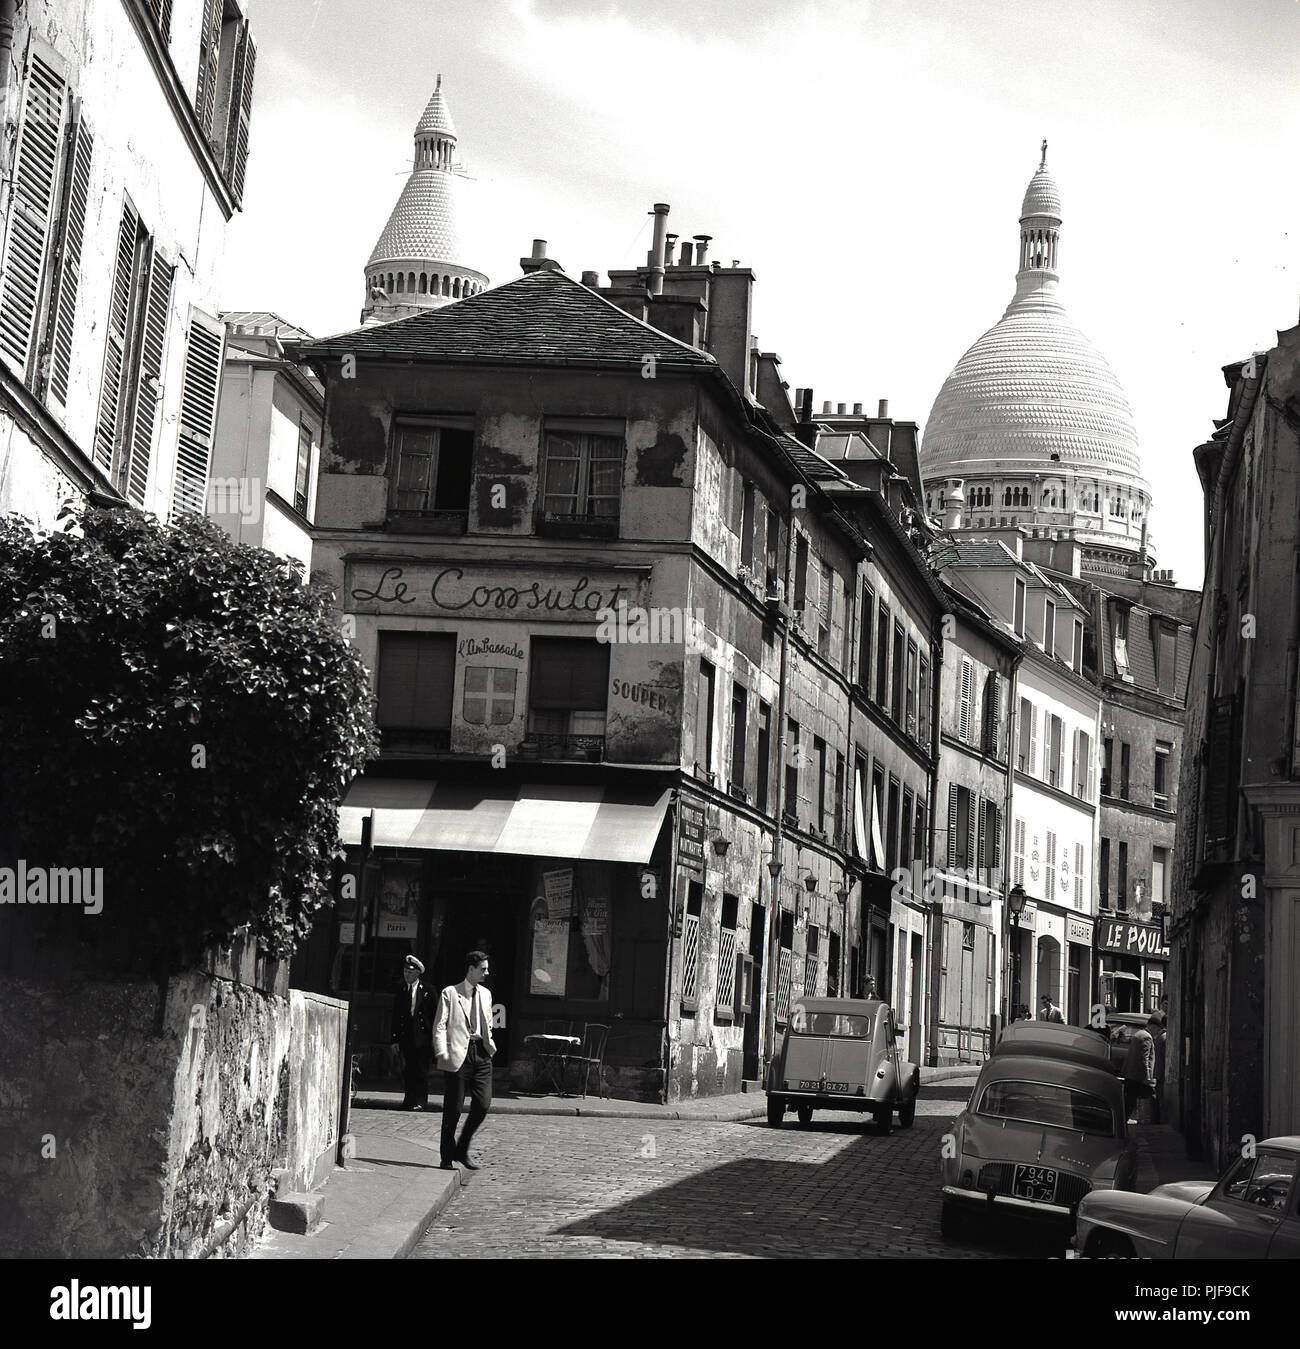 1950s, historical, a view of rue Norvins,a cobblestone street in the Montmartre district of Paris, famous for its artists, showing the decaying building housing the old Parisan cafe, Le Consulat and in the background, the domes of of the Roman Catholic church, Sacre-Coeur. The classic french car, the Citroen 2CV can be seen in the pciture. Stock Photo